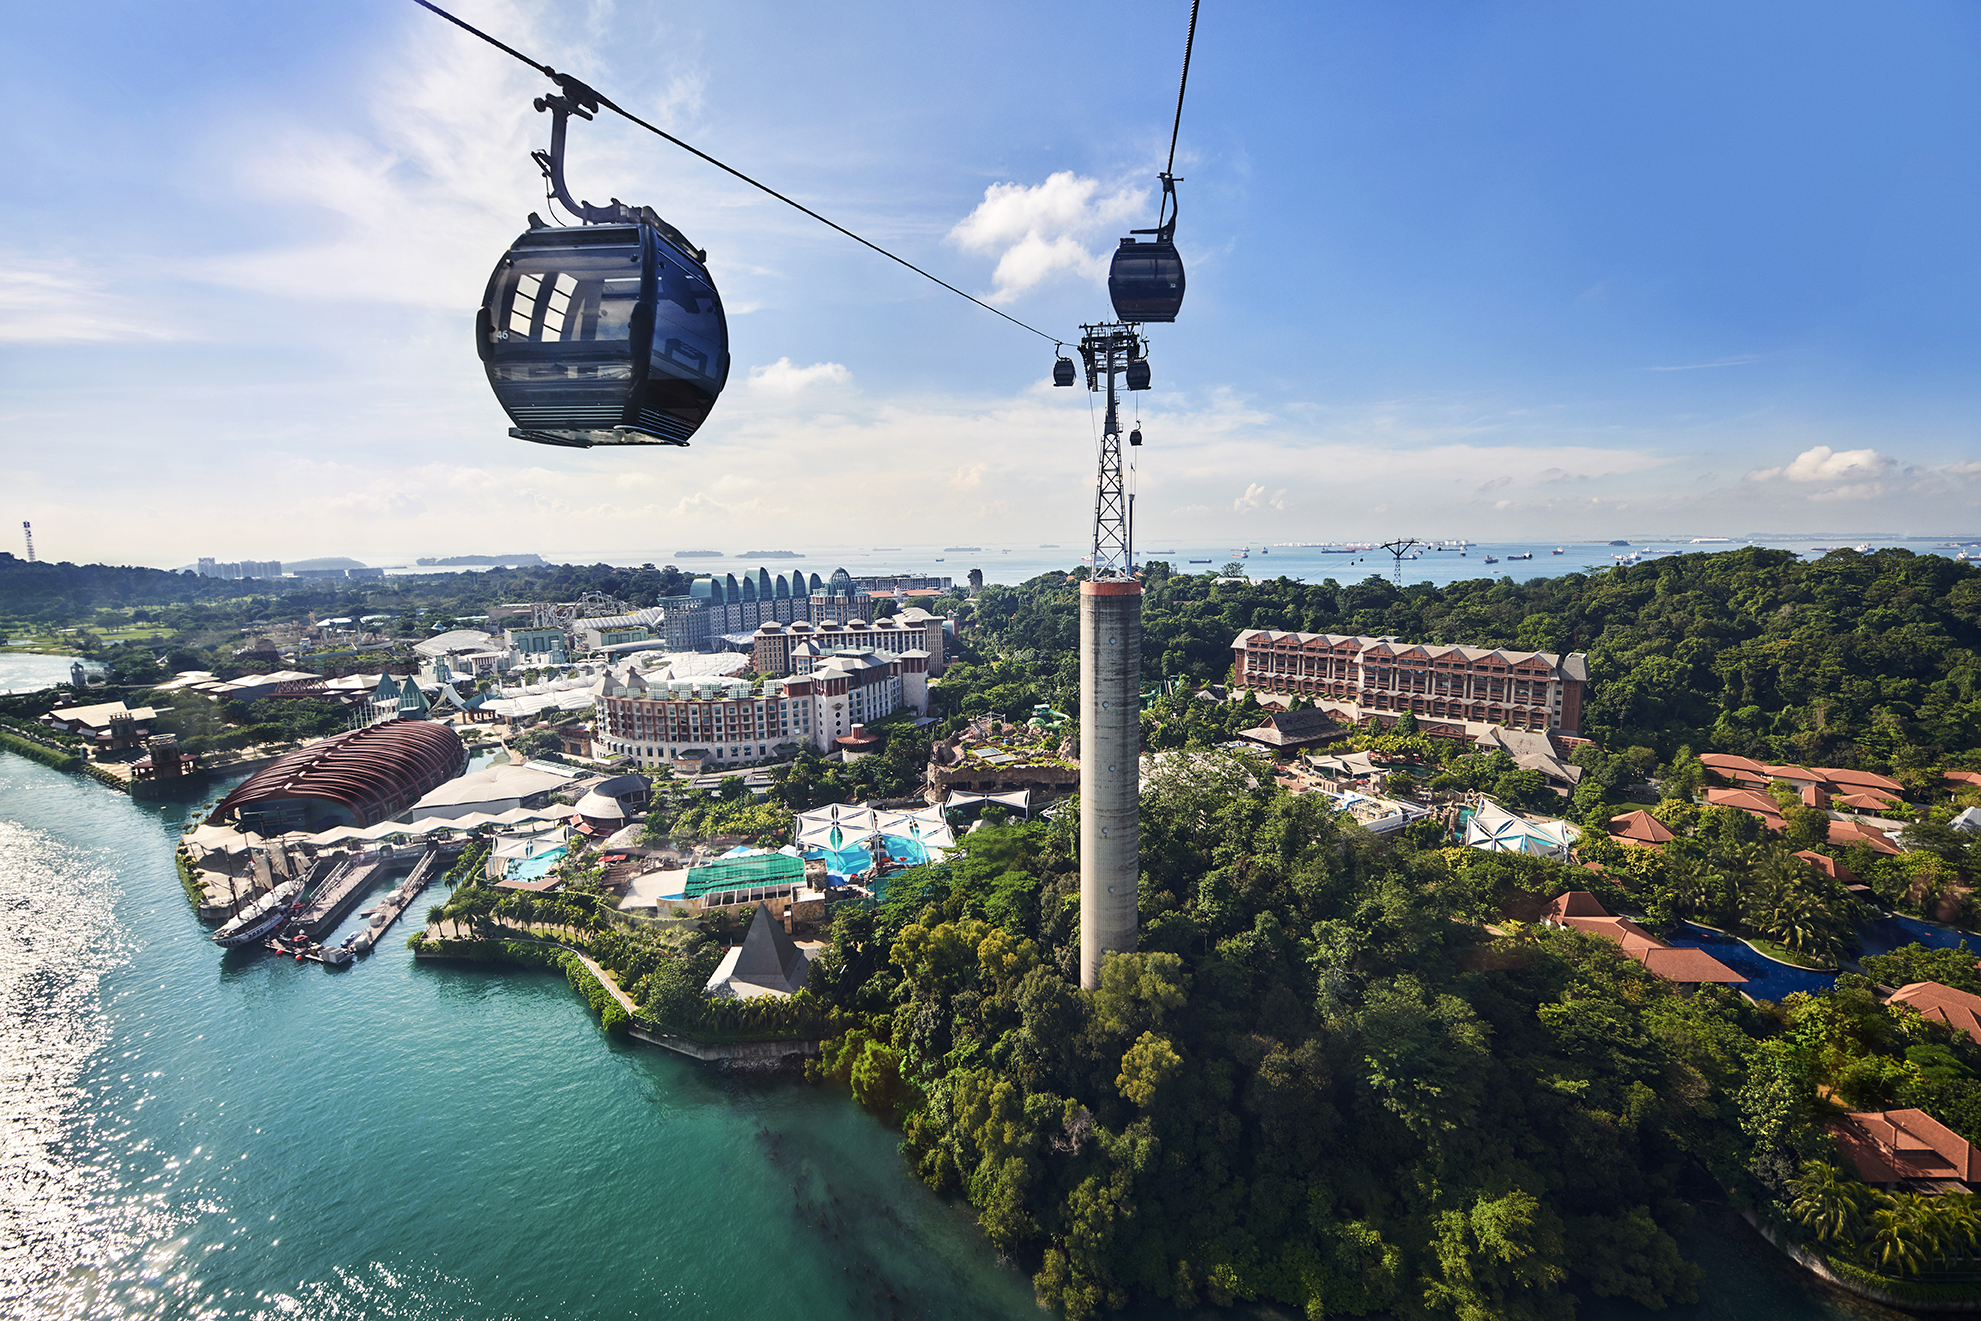 Exploring Sentosa by Cable Car